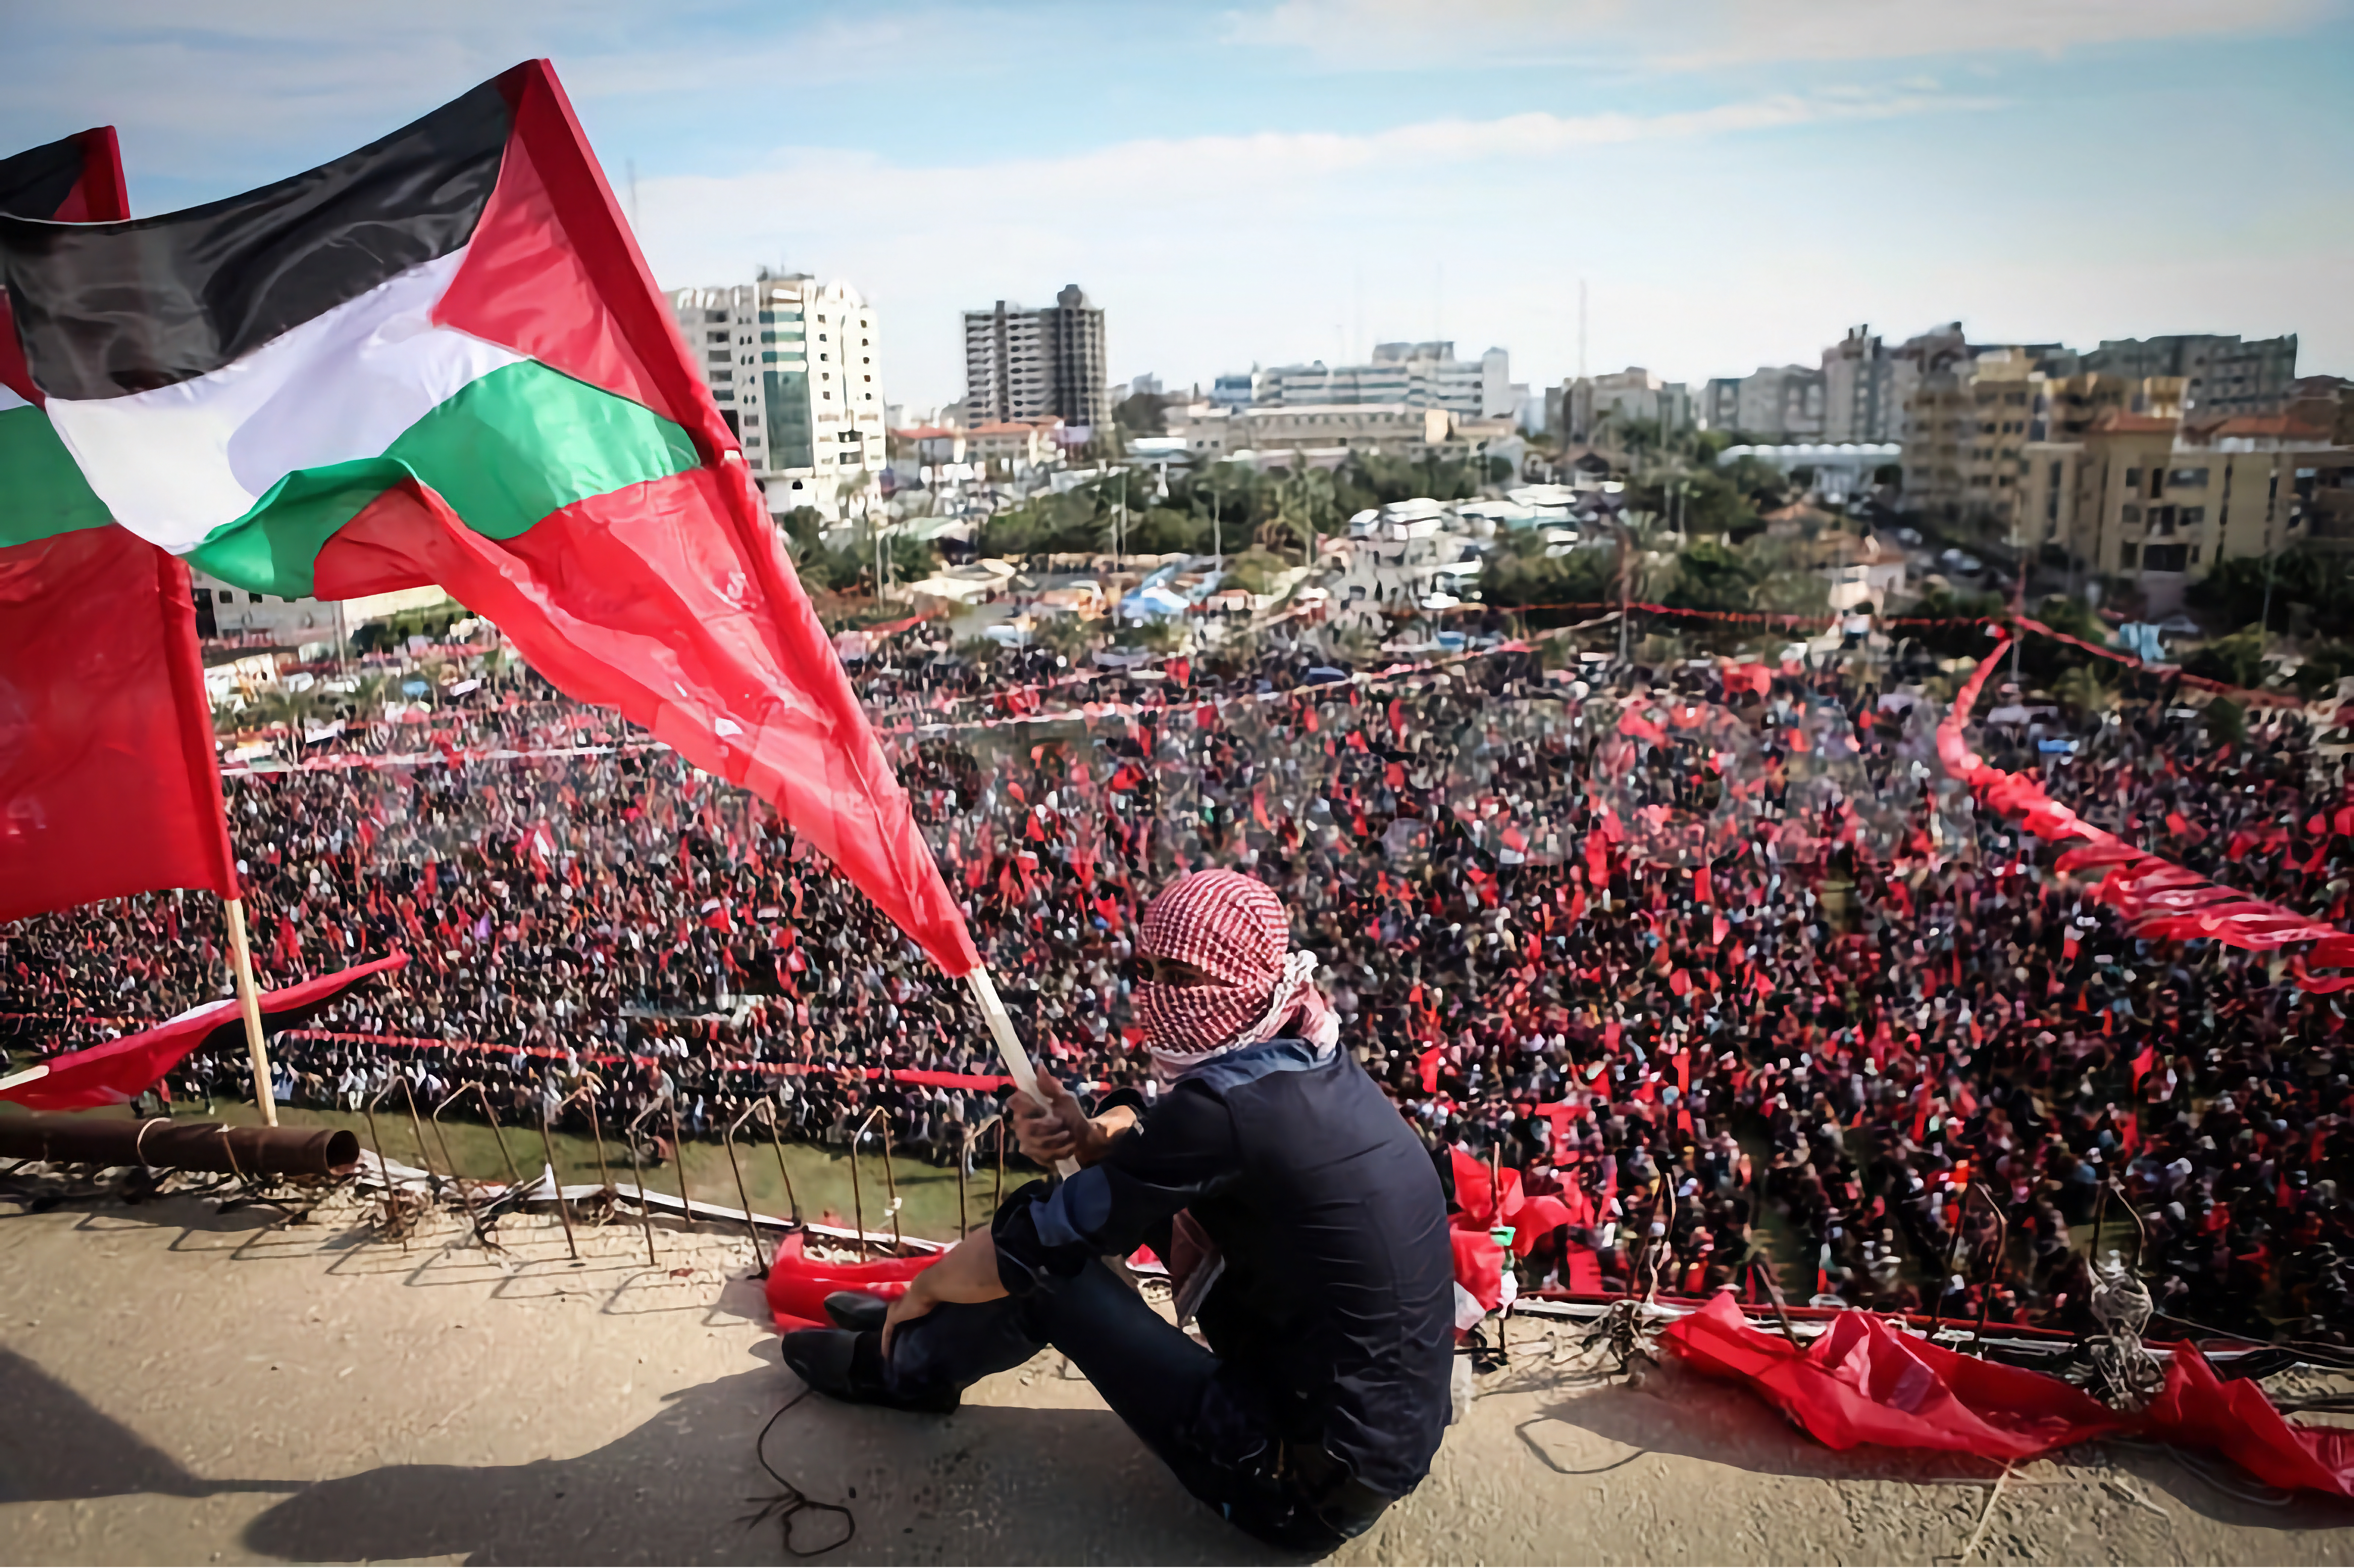 Solidarity With The Palestinian People